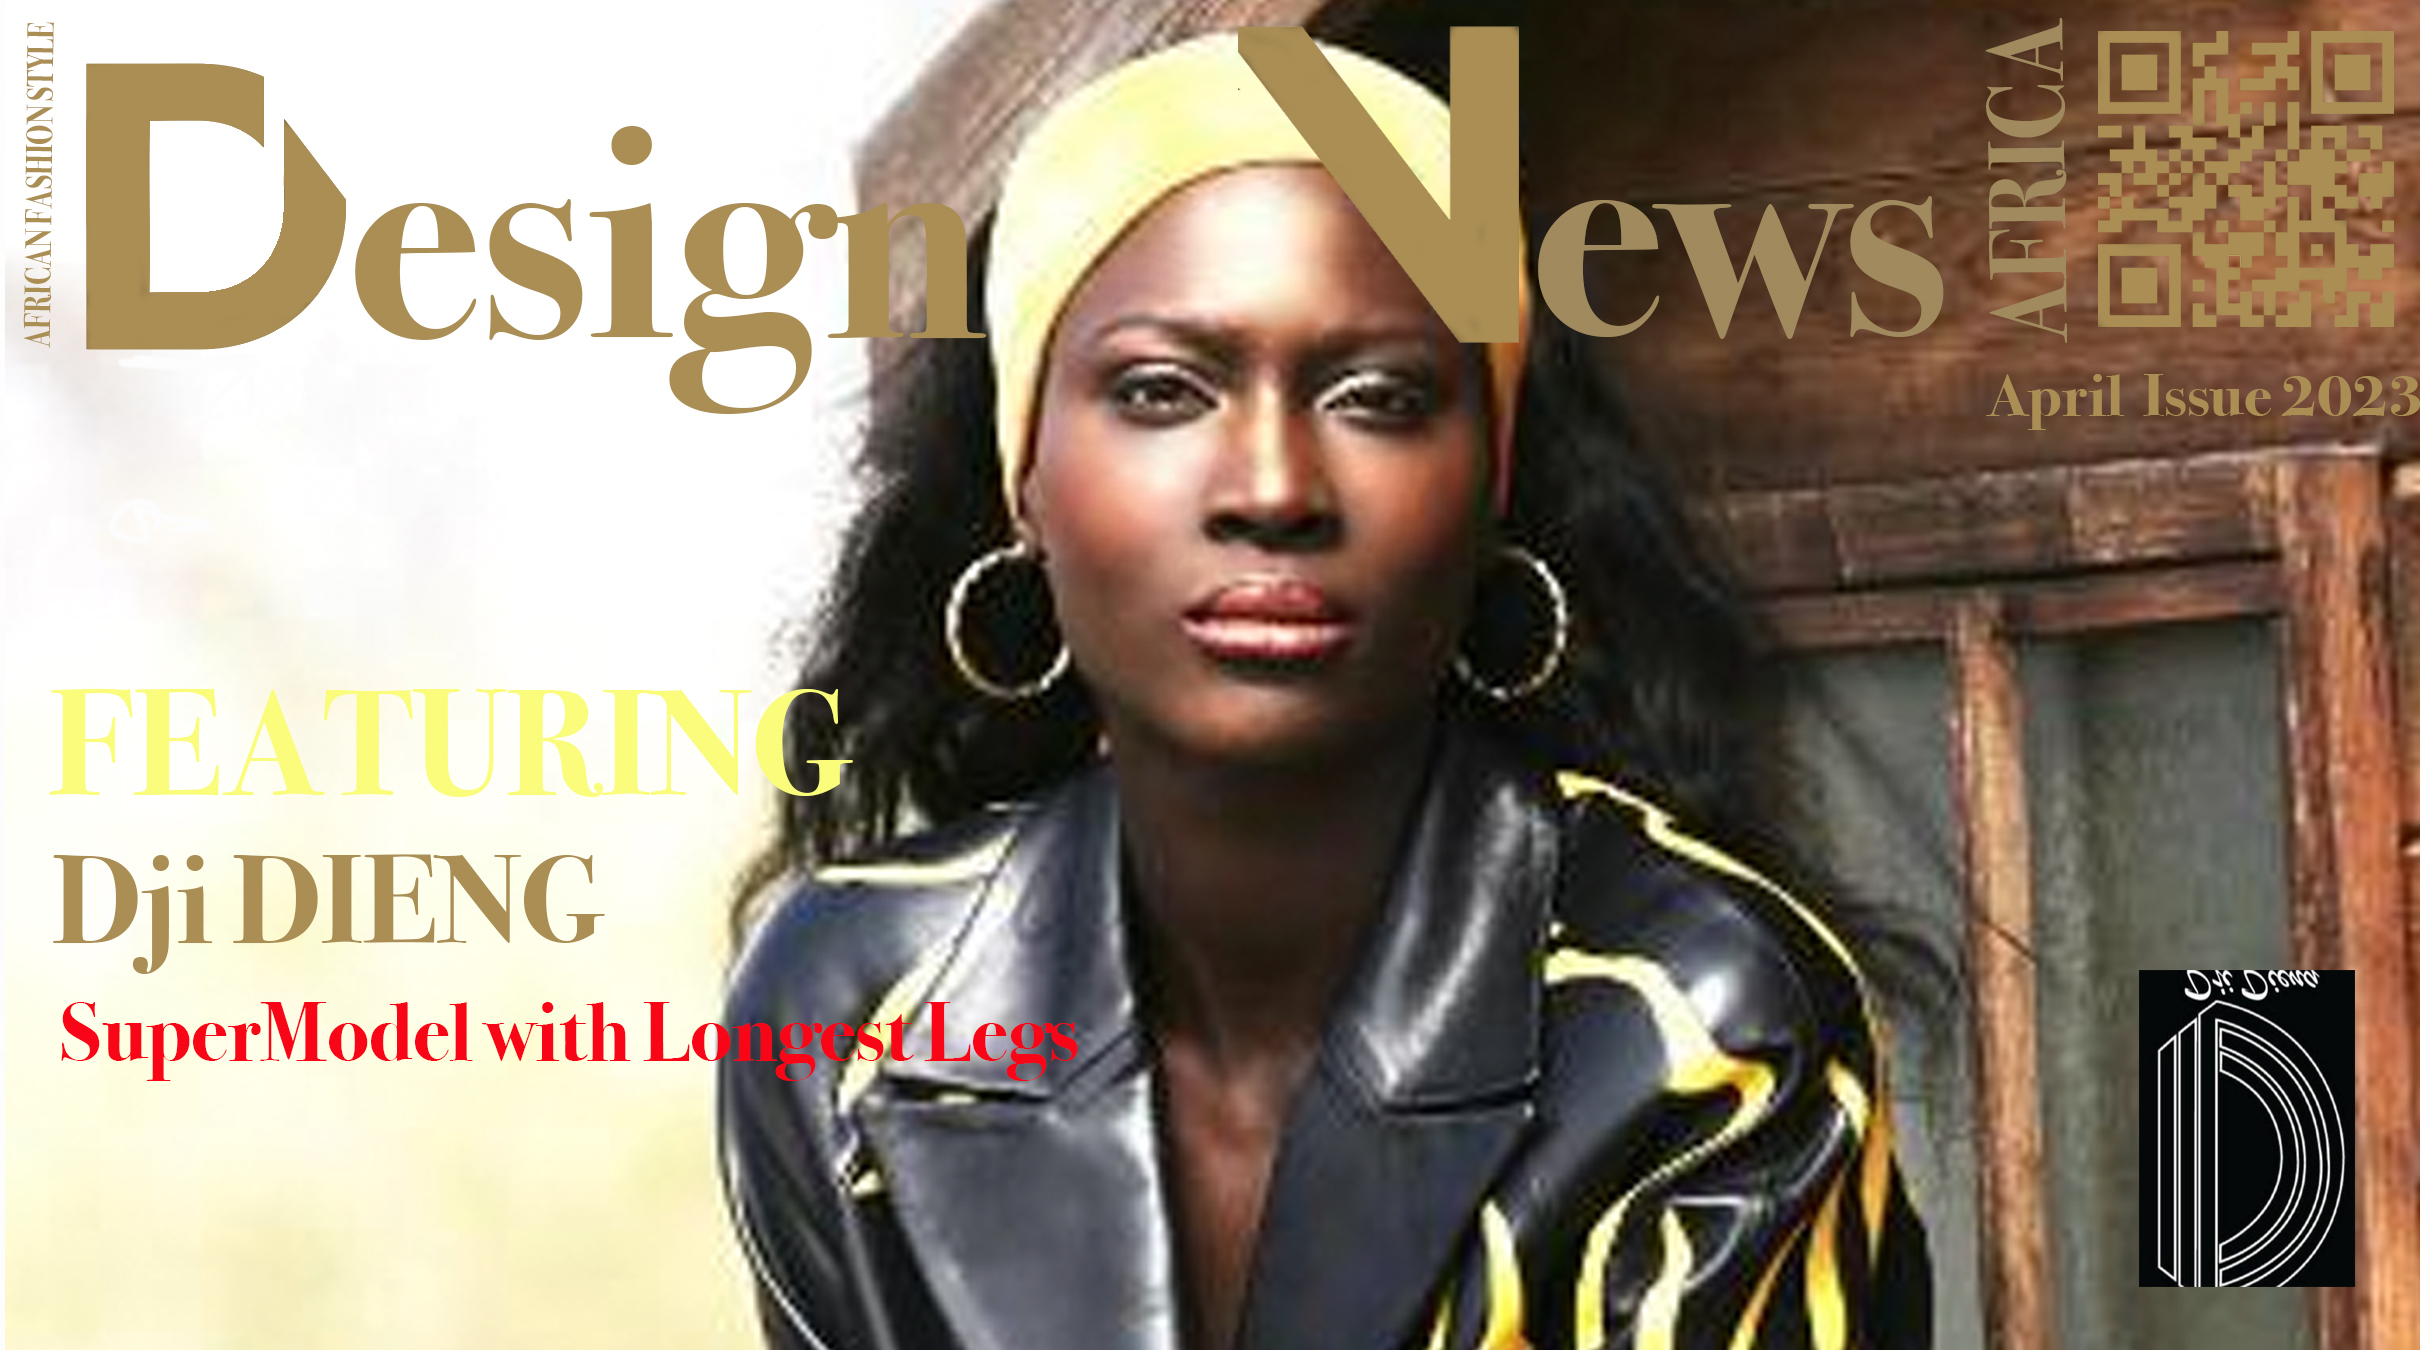 AFRICA-VOGUE-COVER--AFRICA-FASHION-STYLE-2490X3508-DN-AFRICA-COVER-NUMBER-243-APRIL-24TH-2023-DJI-DIENG-SUPER-MODEL-WITH-THE-LONGEST-LEGS-DN-AFRICA-MEDIA-PARTNER